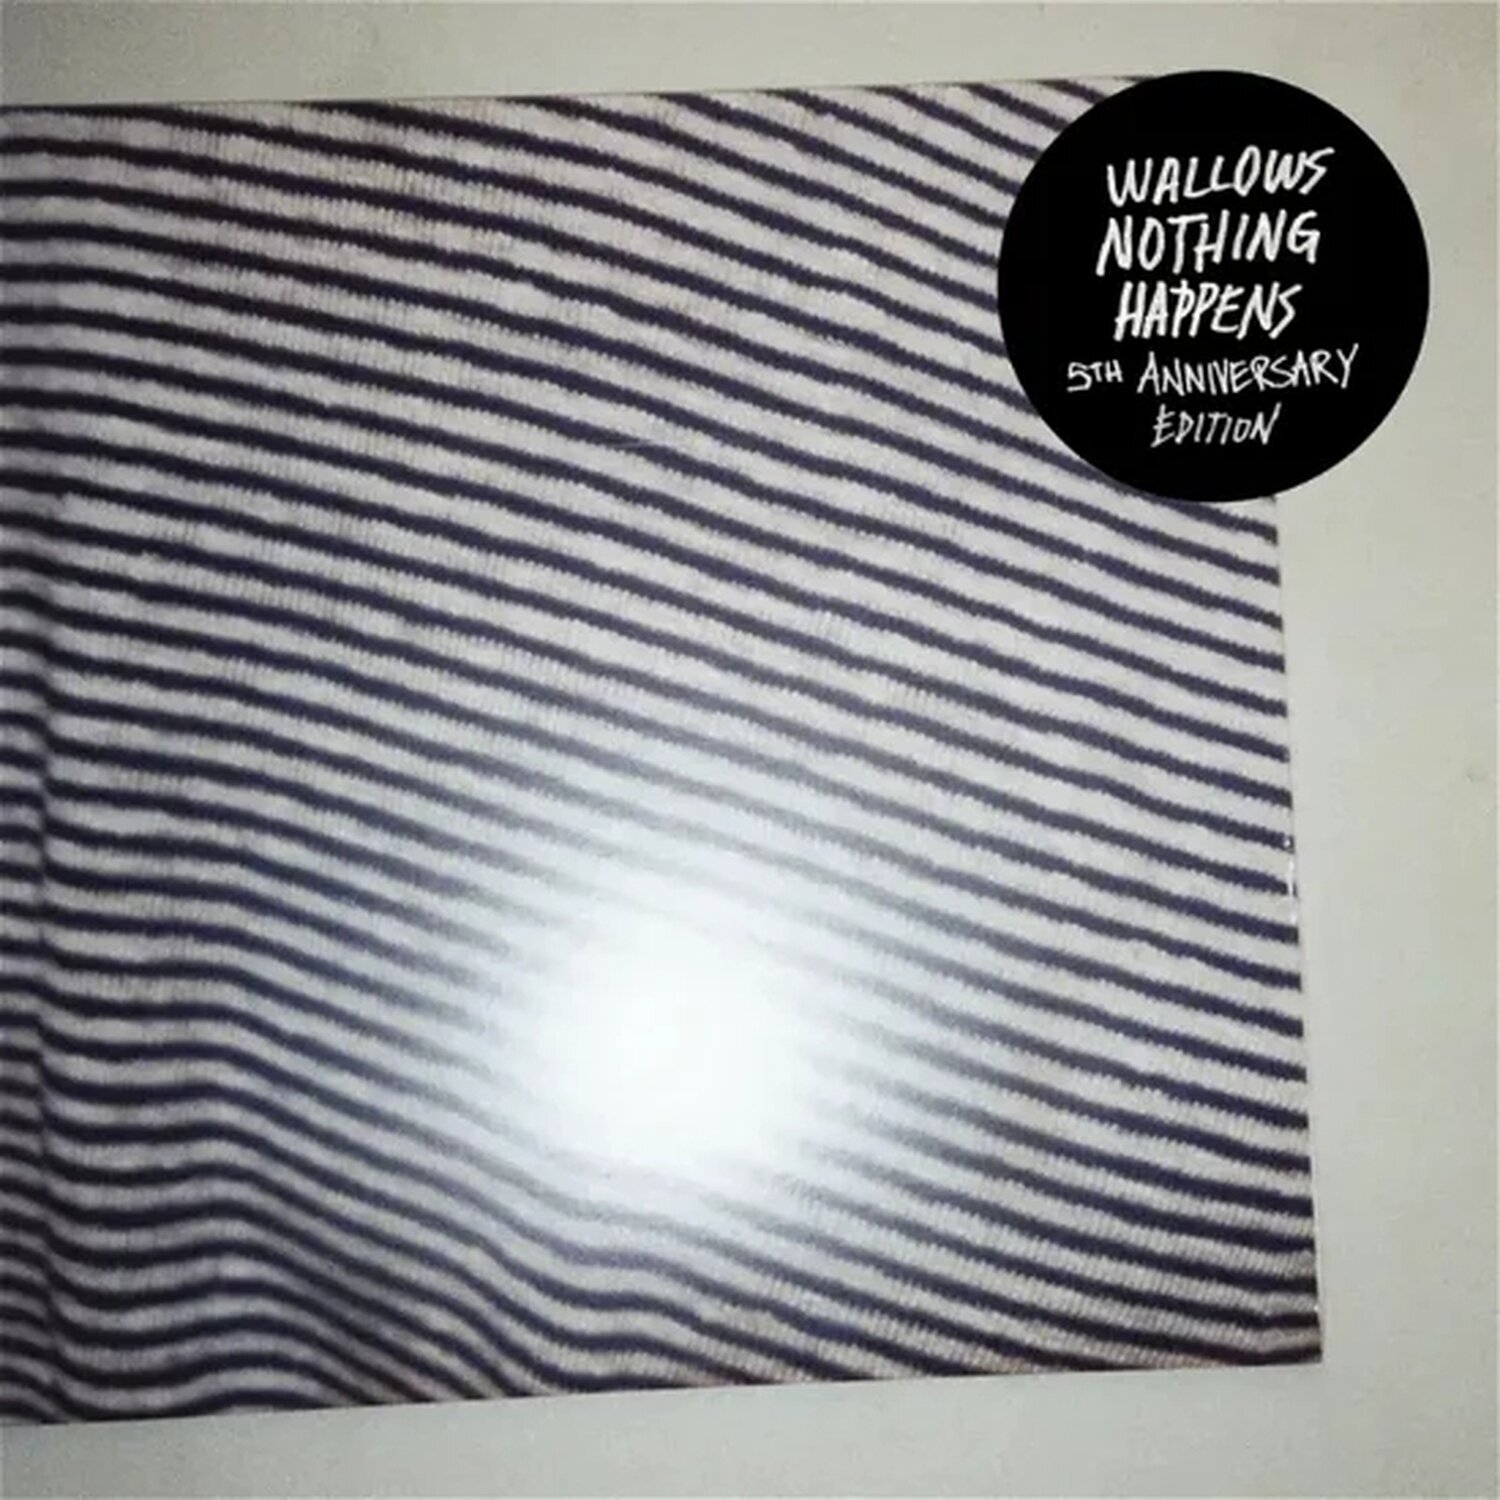 Vinyl Record Wallows - Nothing Happens (White & Blue Coloured) (Rsd 2024) (2 LP)